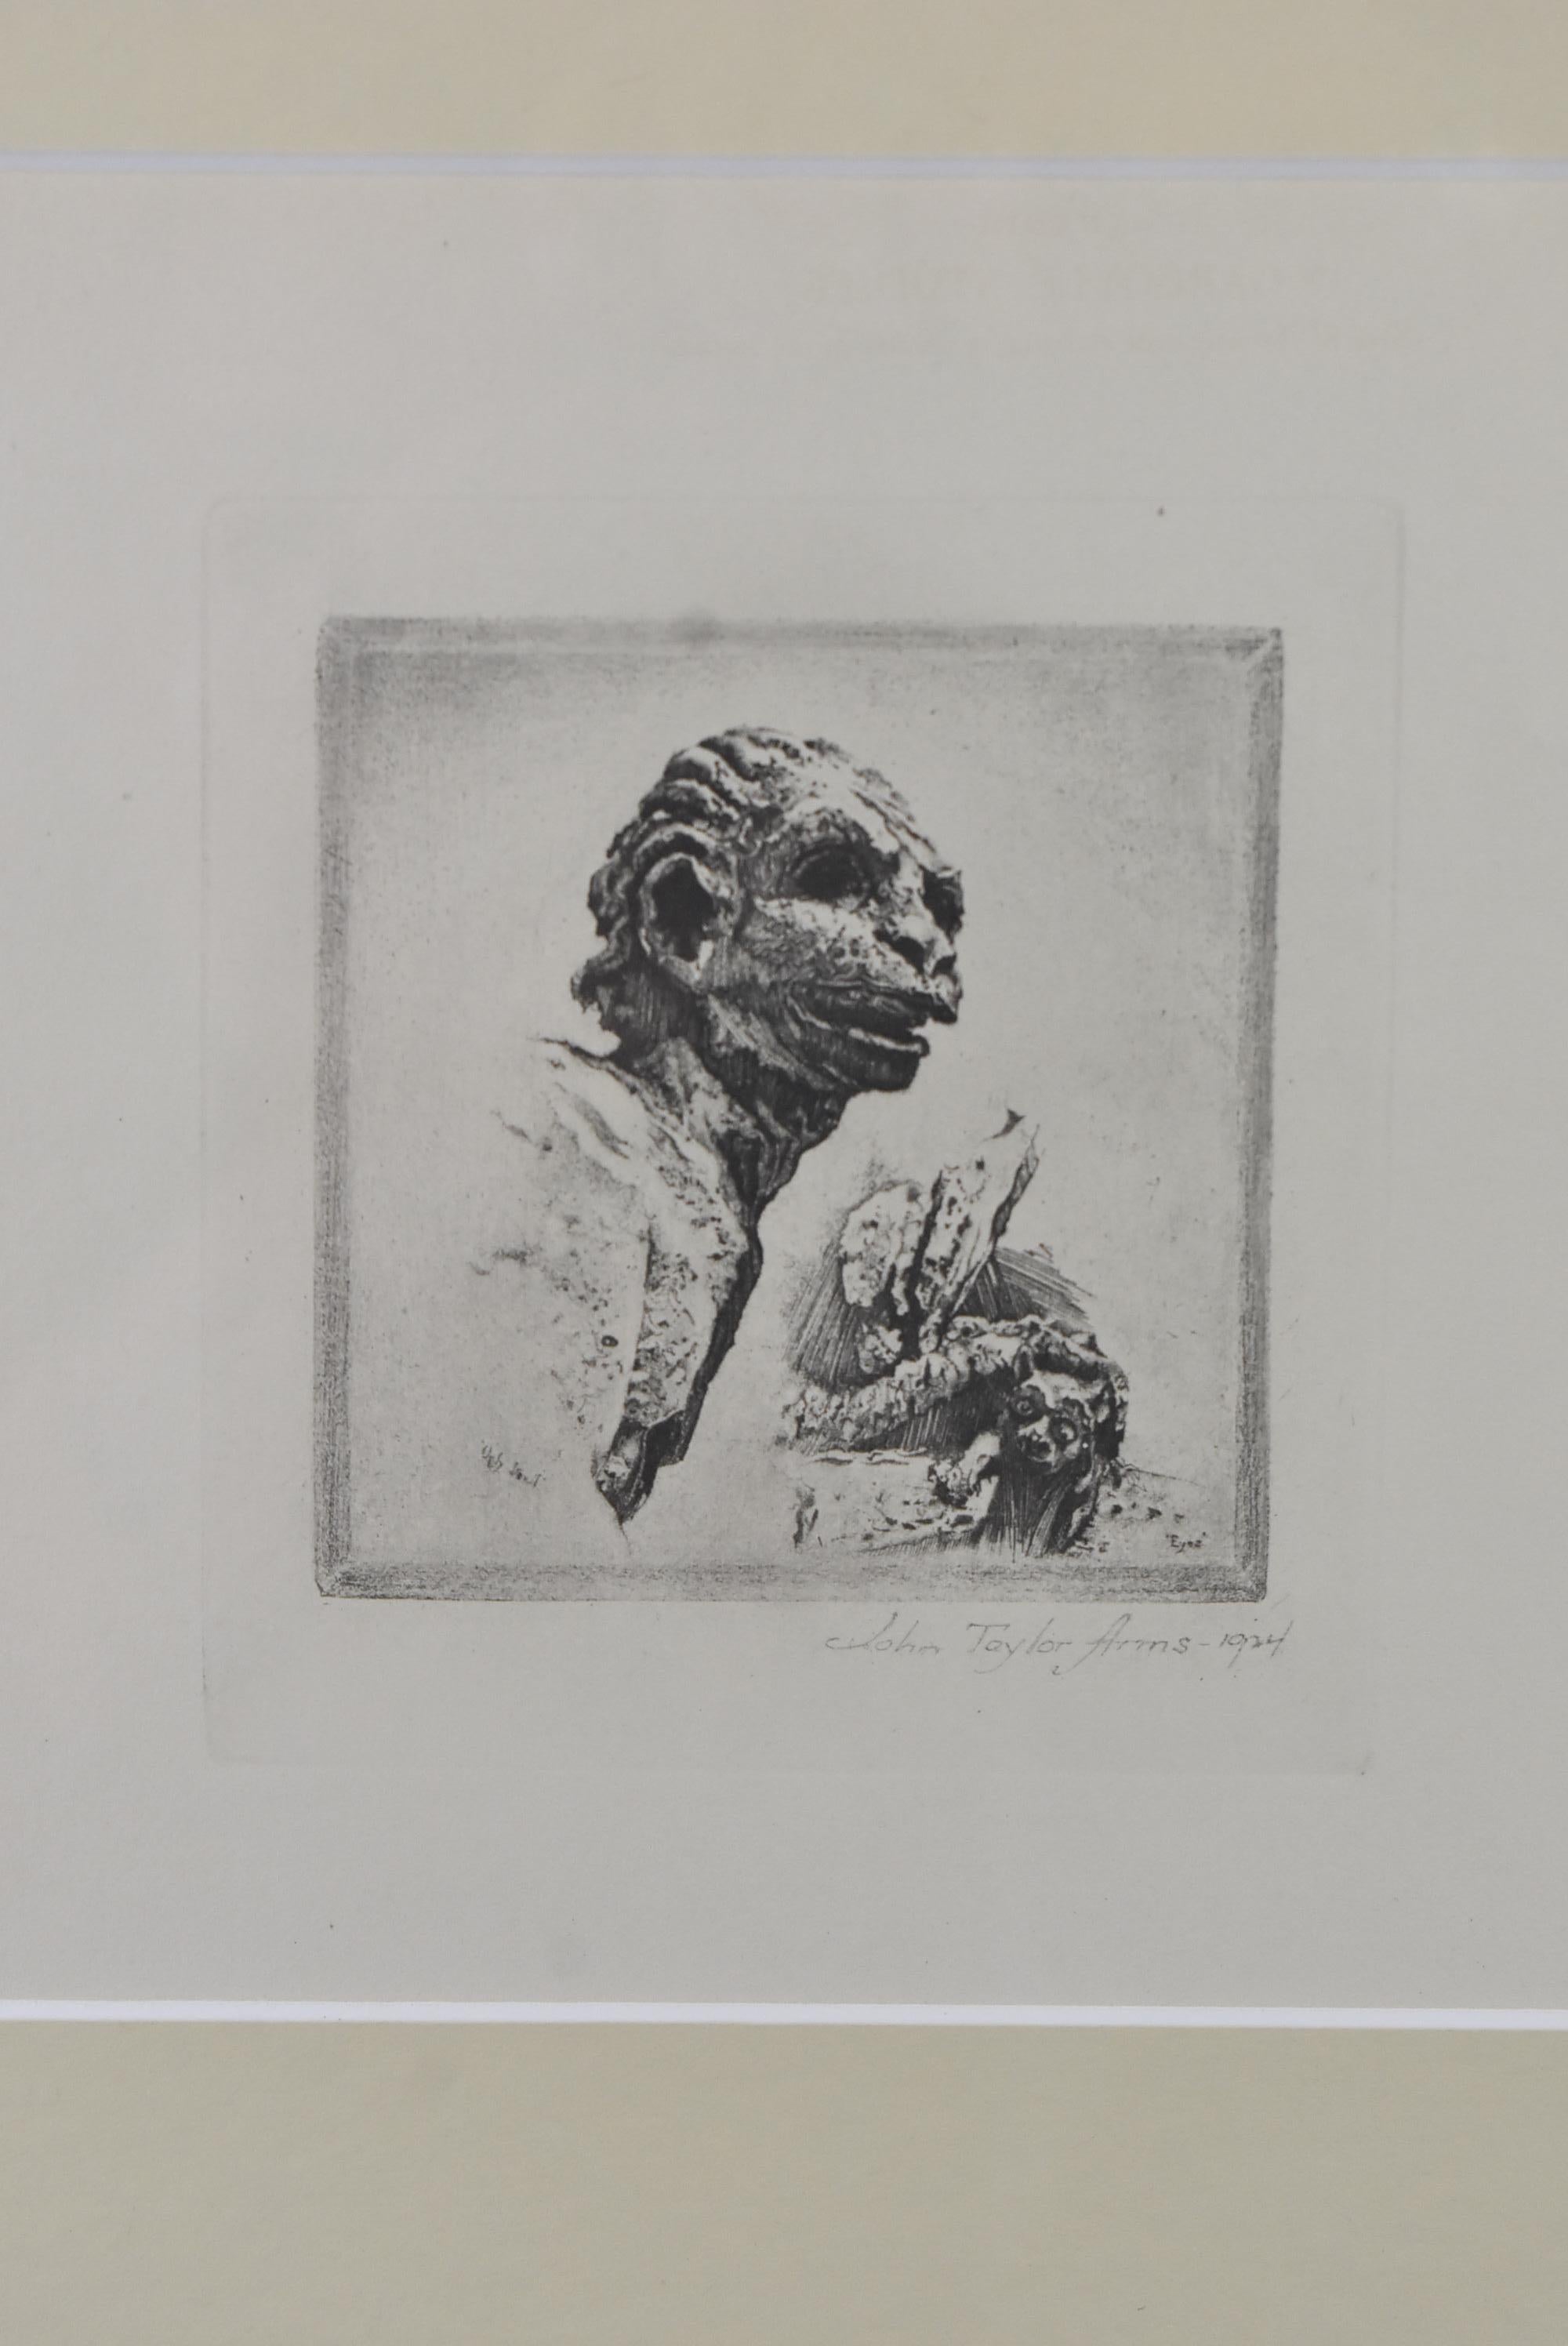 This etching by John Taylor Arms is titled 